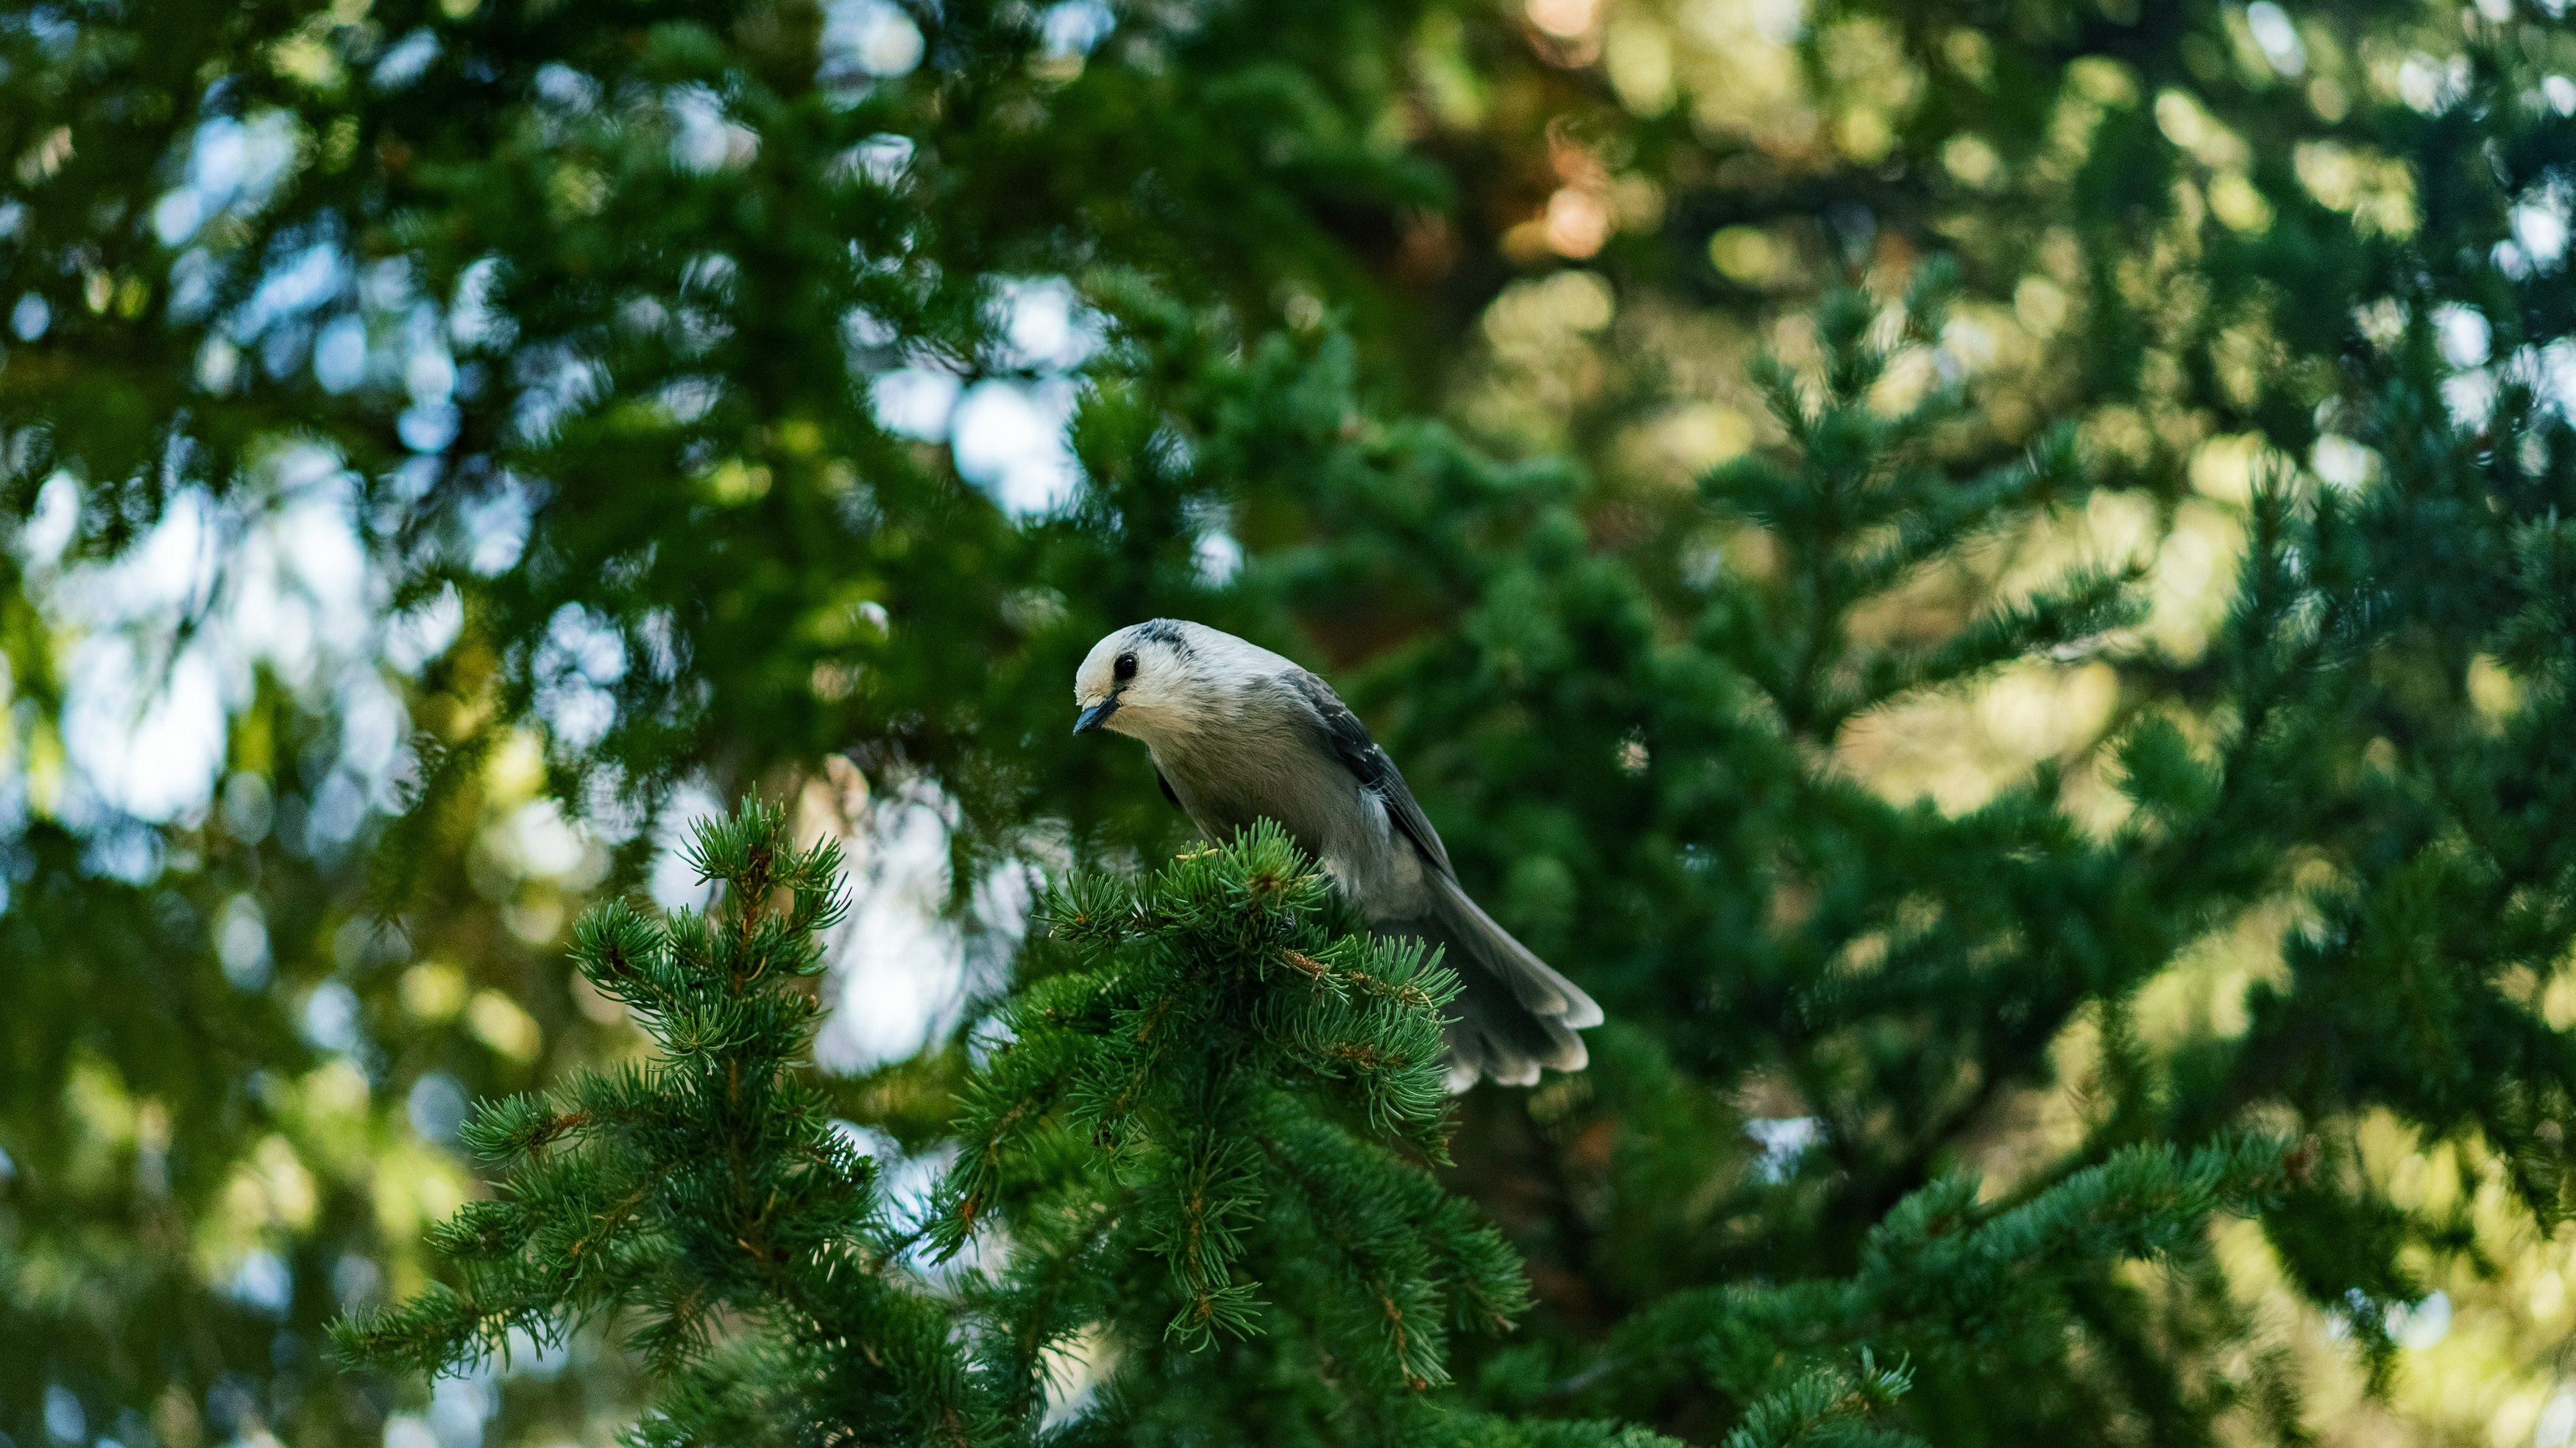 white and blue bird perched on tree branch during daytime